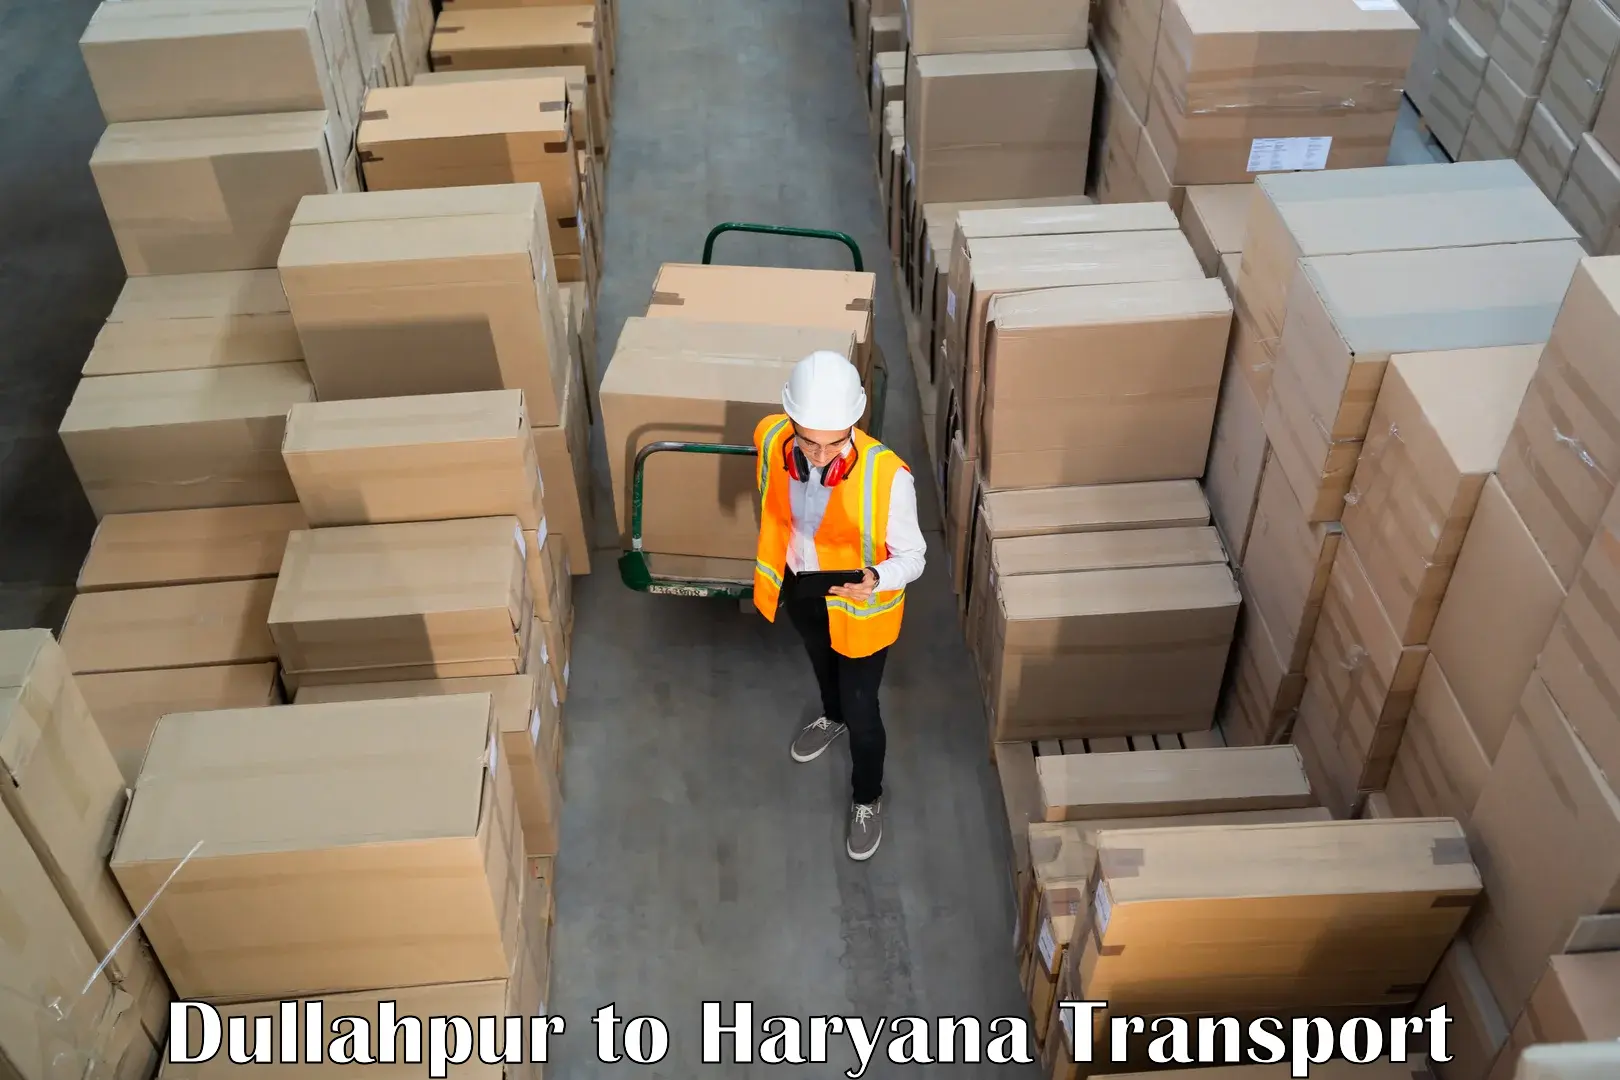 Daily parcel service transport Dullahpur to Pinjore